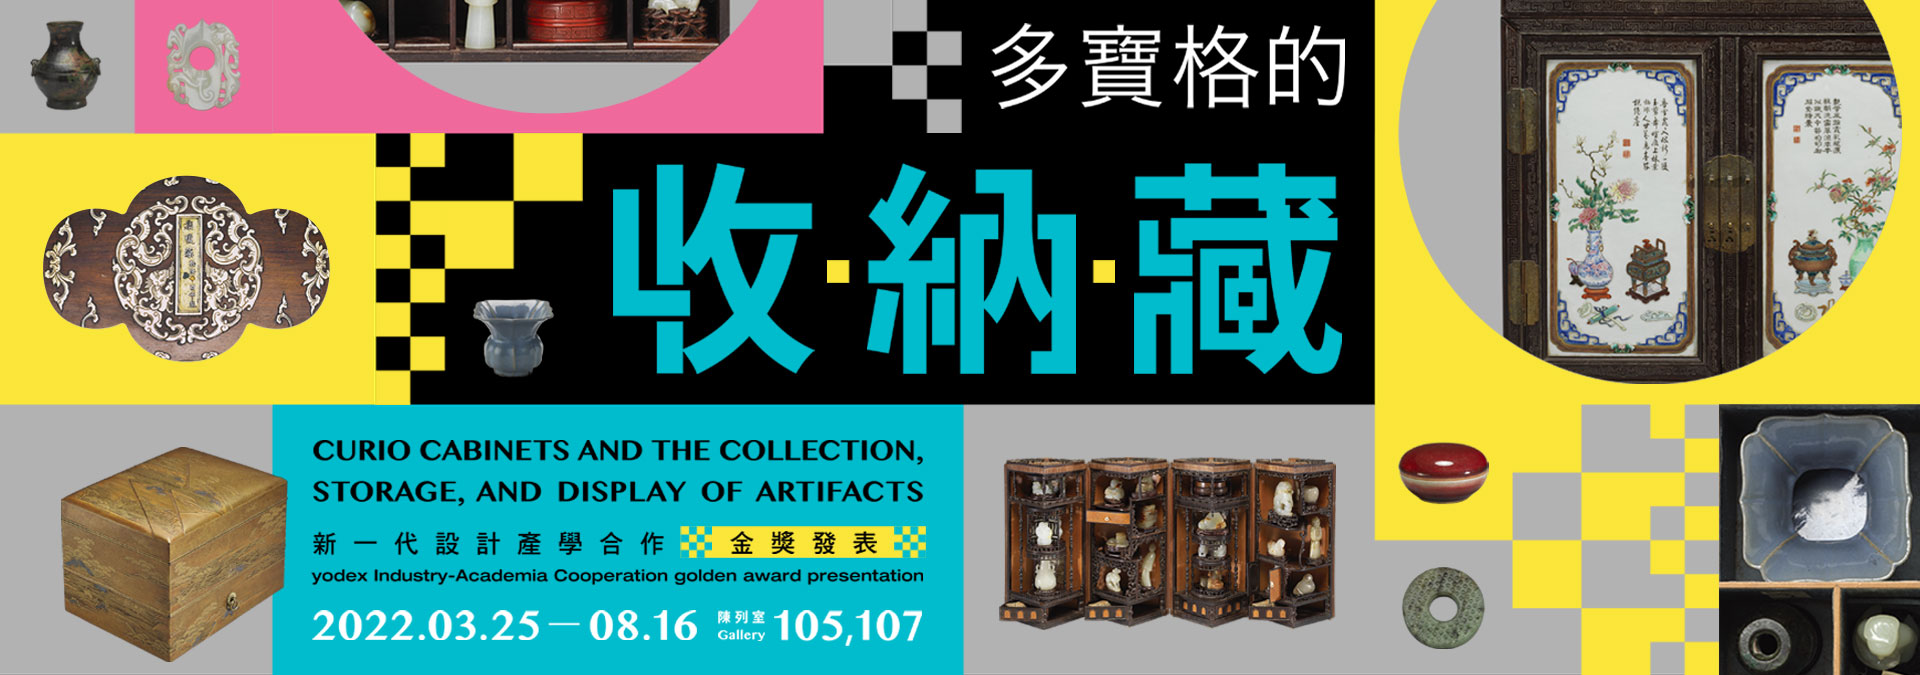 Curio Cabinets and the Collection, Storage, and Display of Artifacts